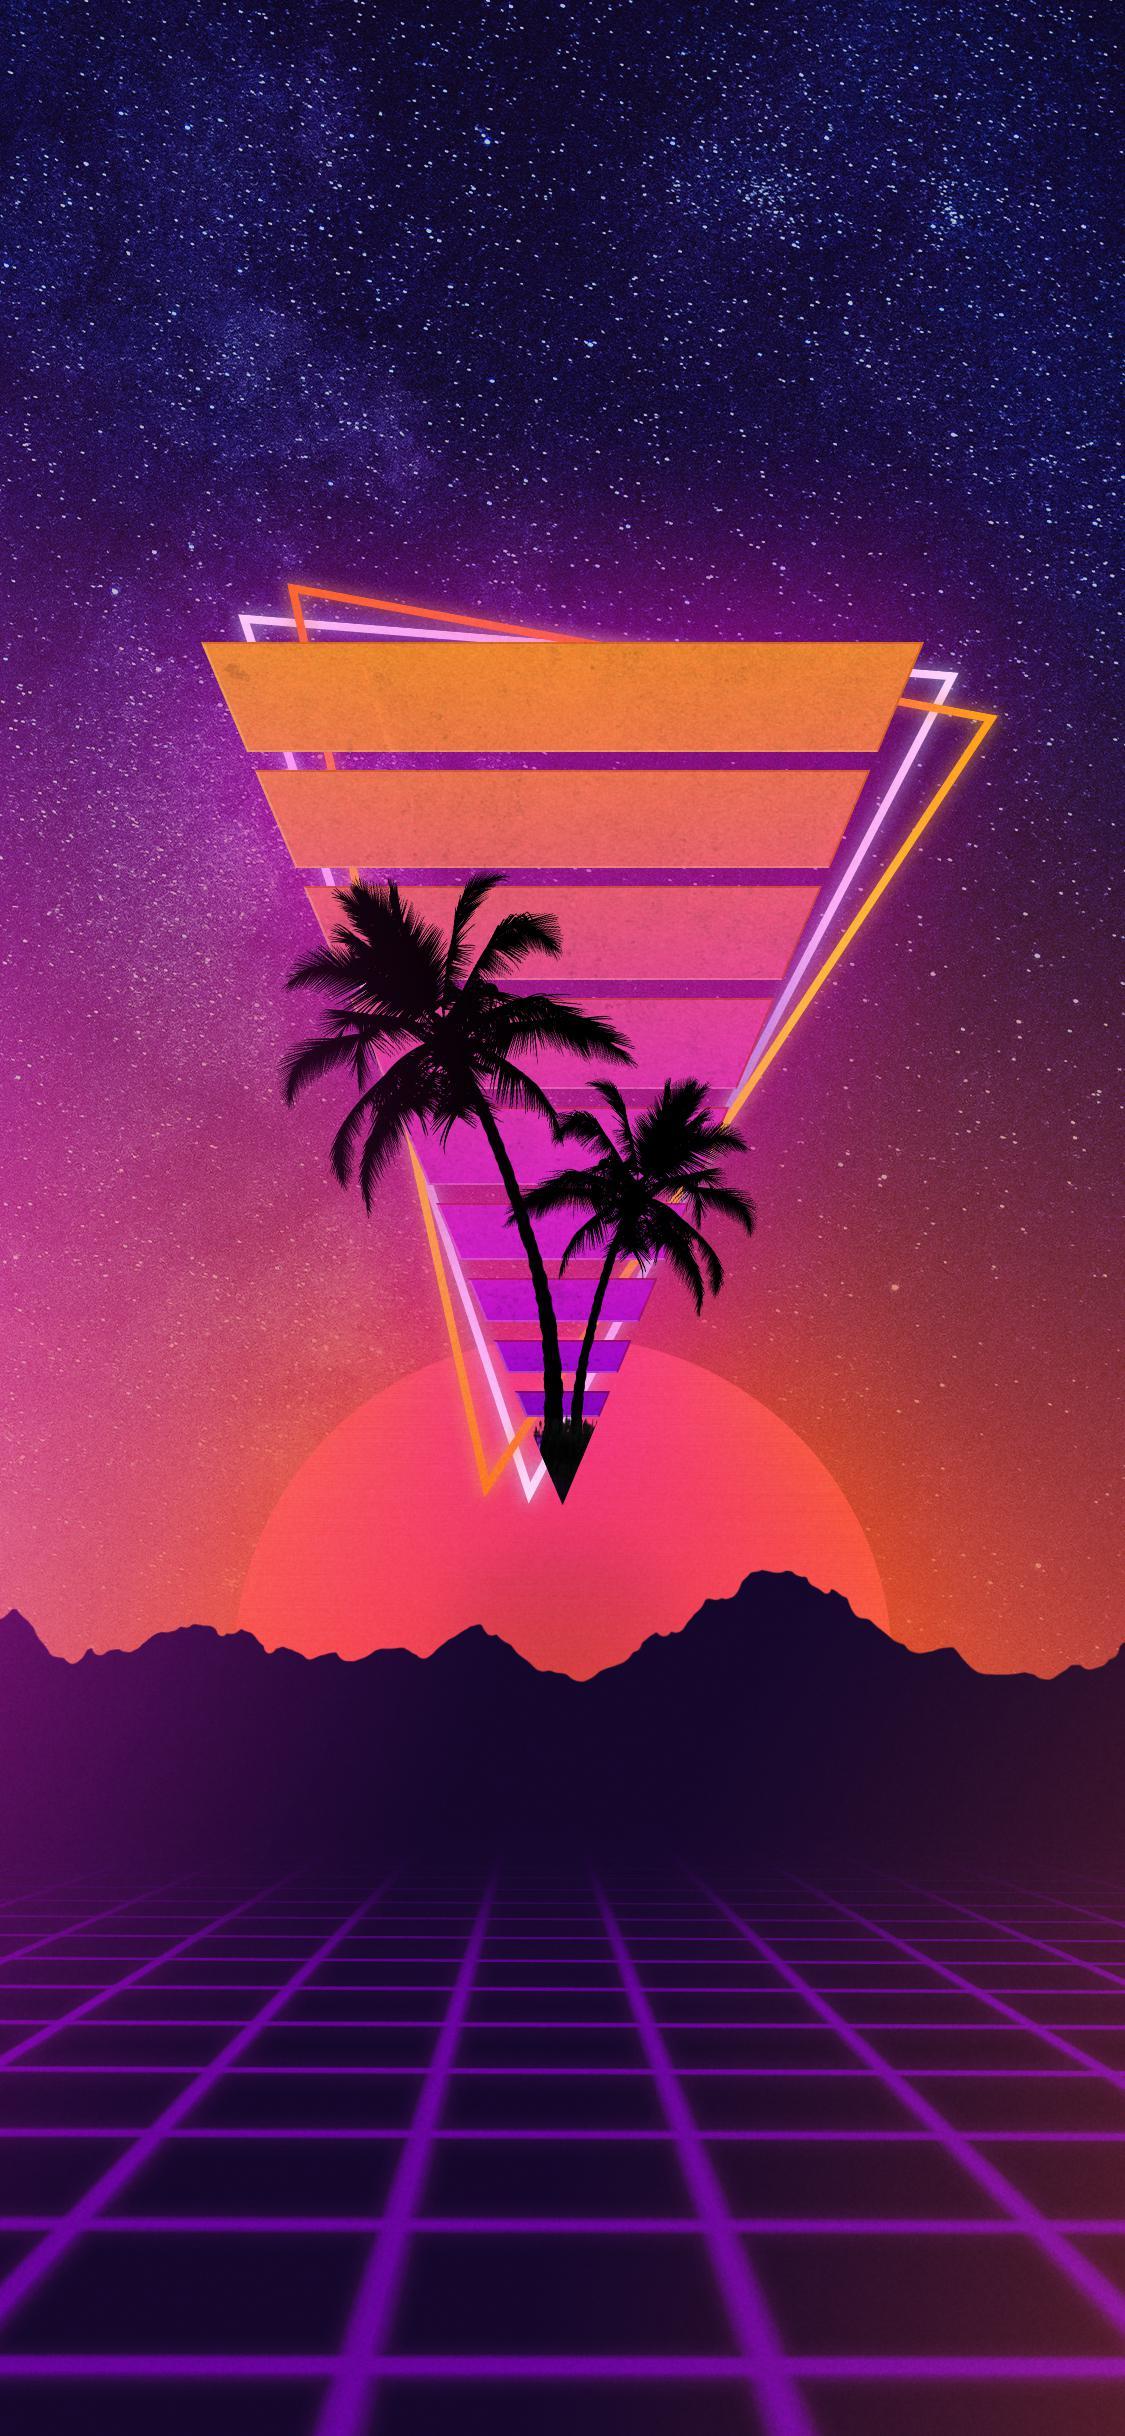 A friend asked me to make a synthwave themed iphone X